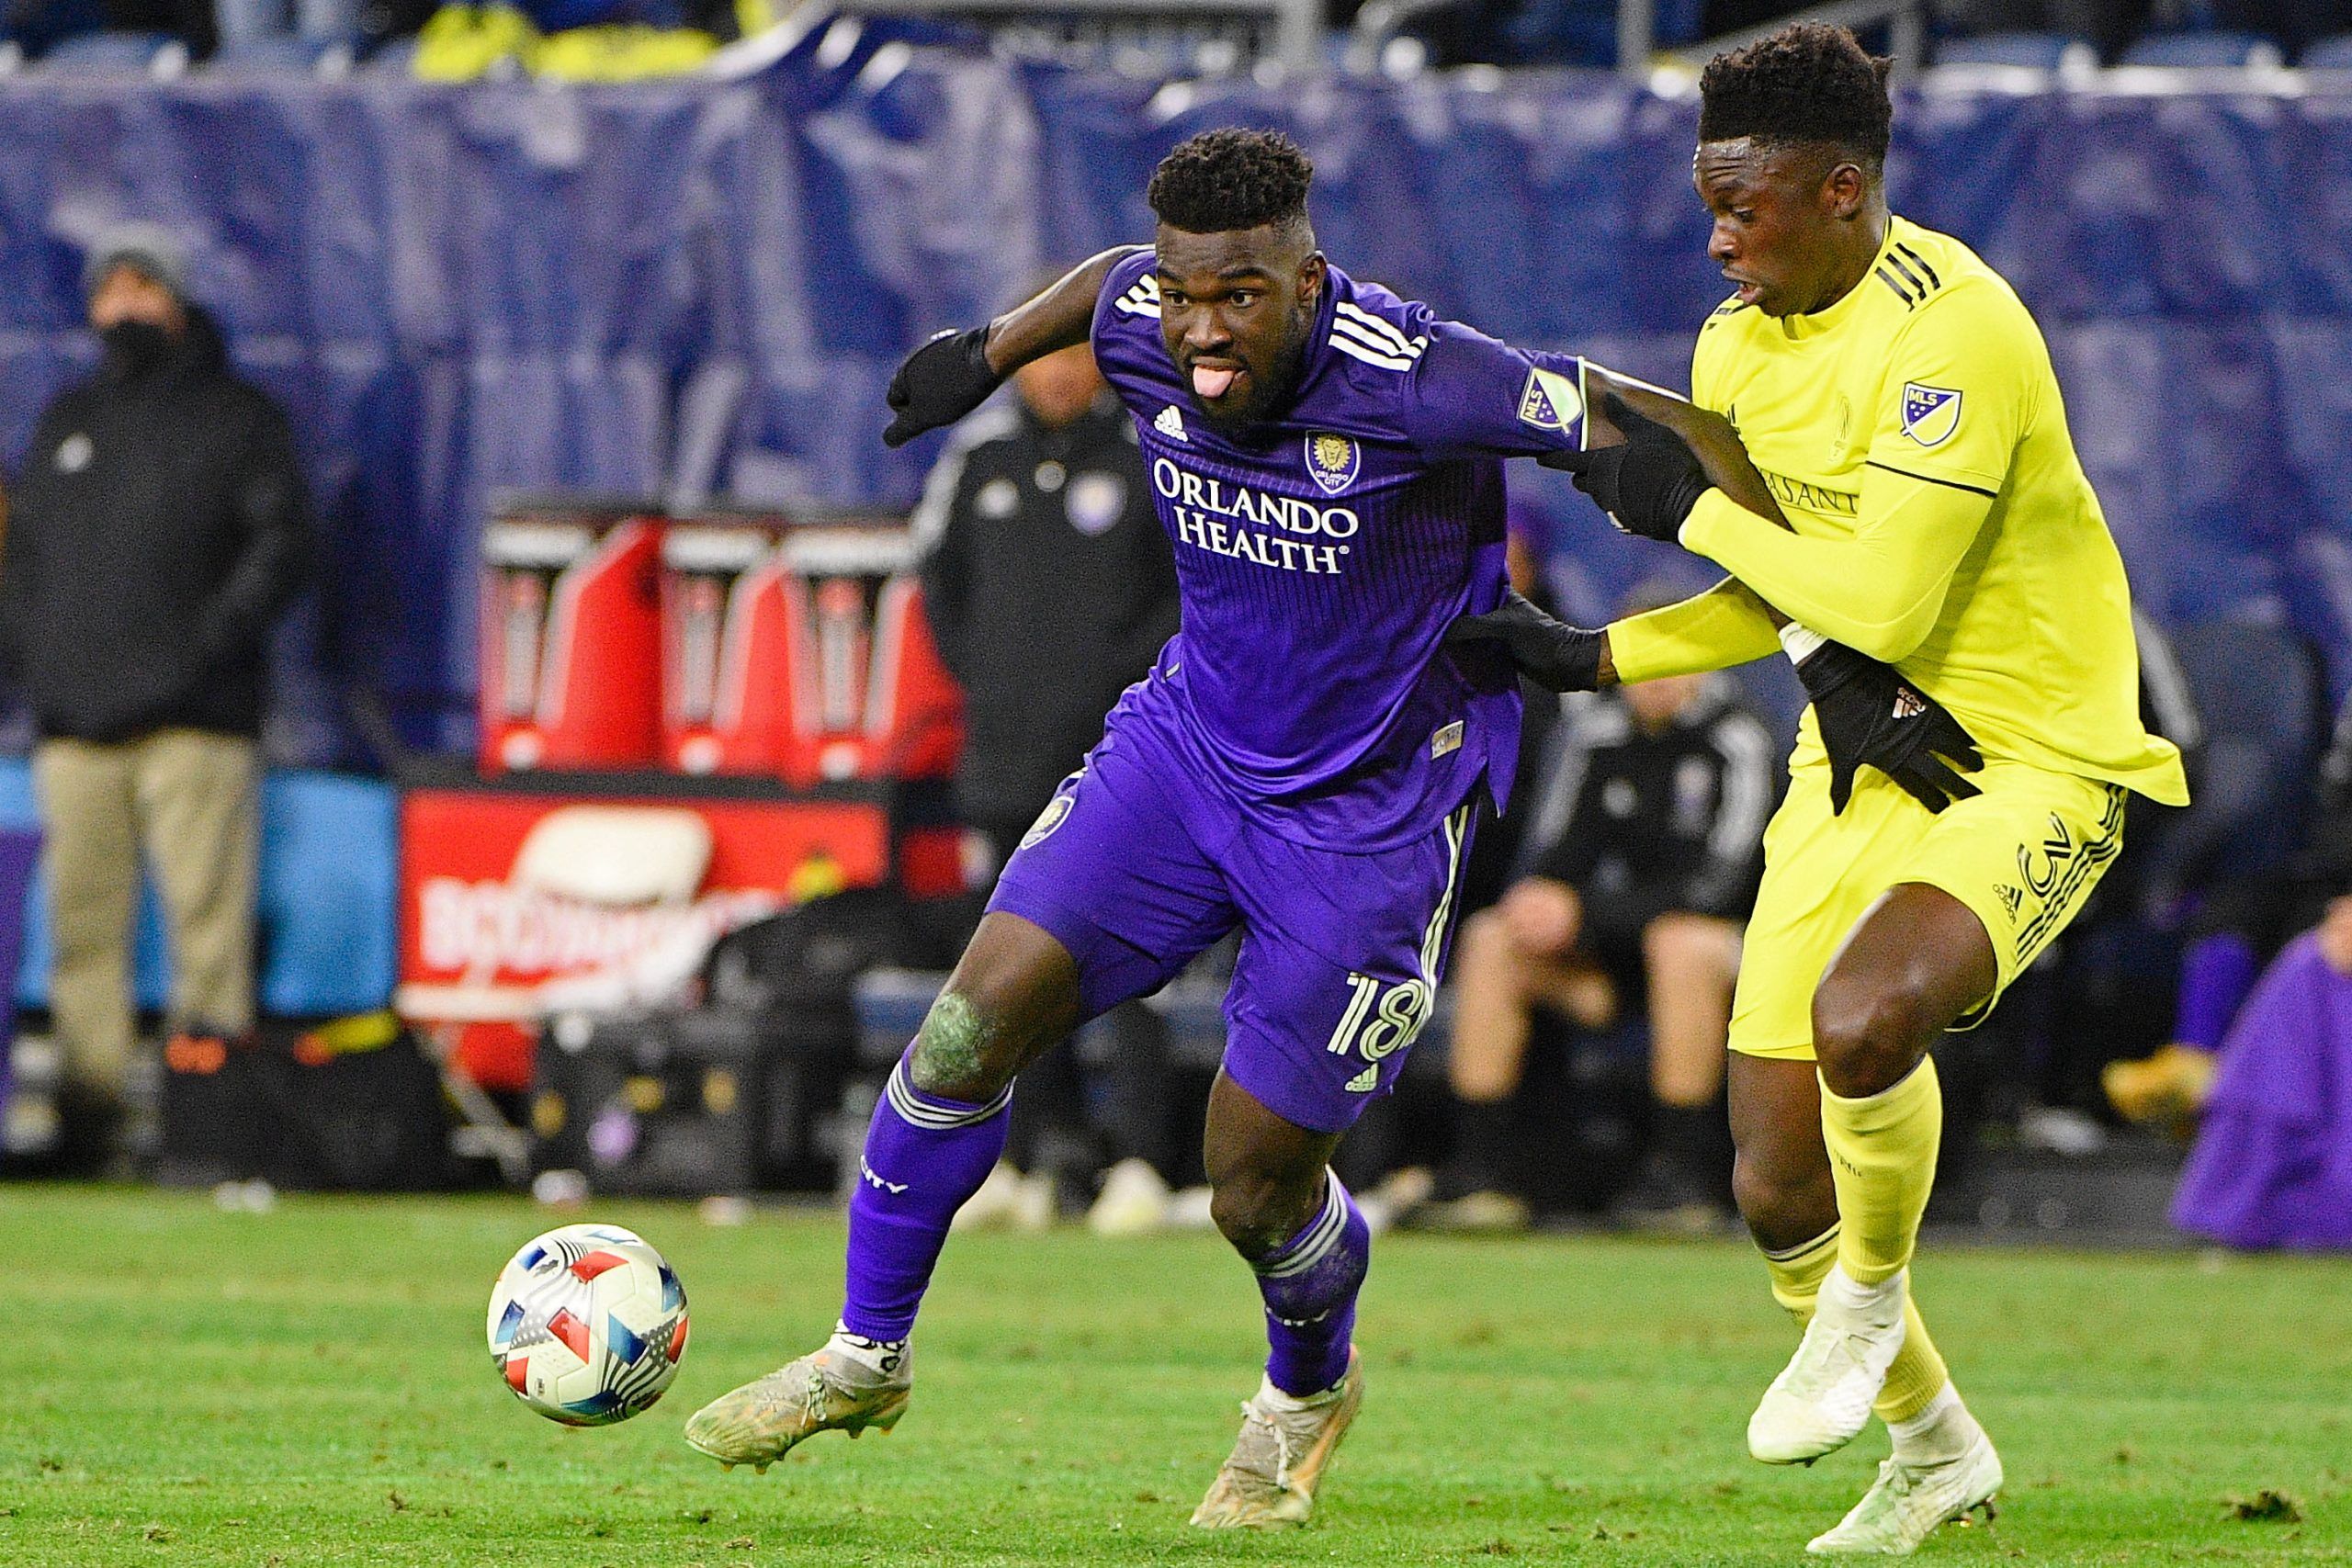 Nov 23, 2021; Nashville, TN, USA; Orlando City forward Daryl Dike (18) battles for the ball with Nashville SC defender Jalil Anibaba (3) during the second half of a round one MLS Playoff game at Nissan Stadium. Mandatory Credit: Steve Roberts-USA TODAY Sports